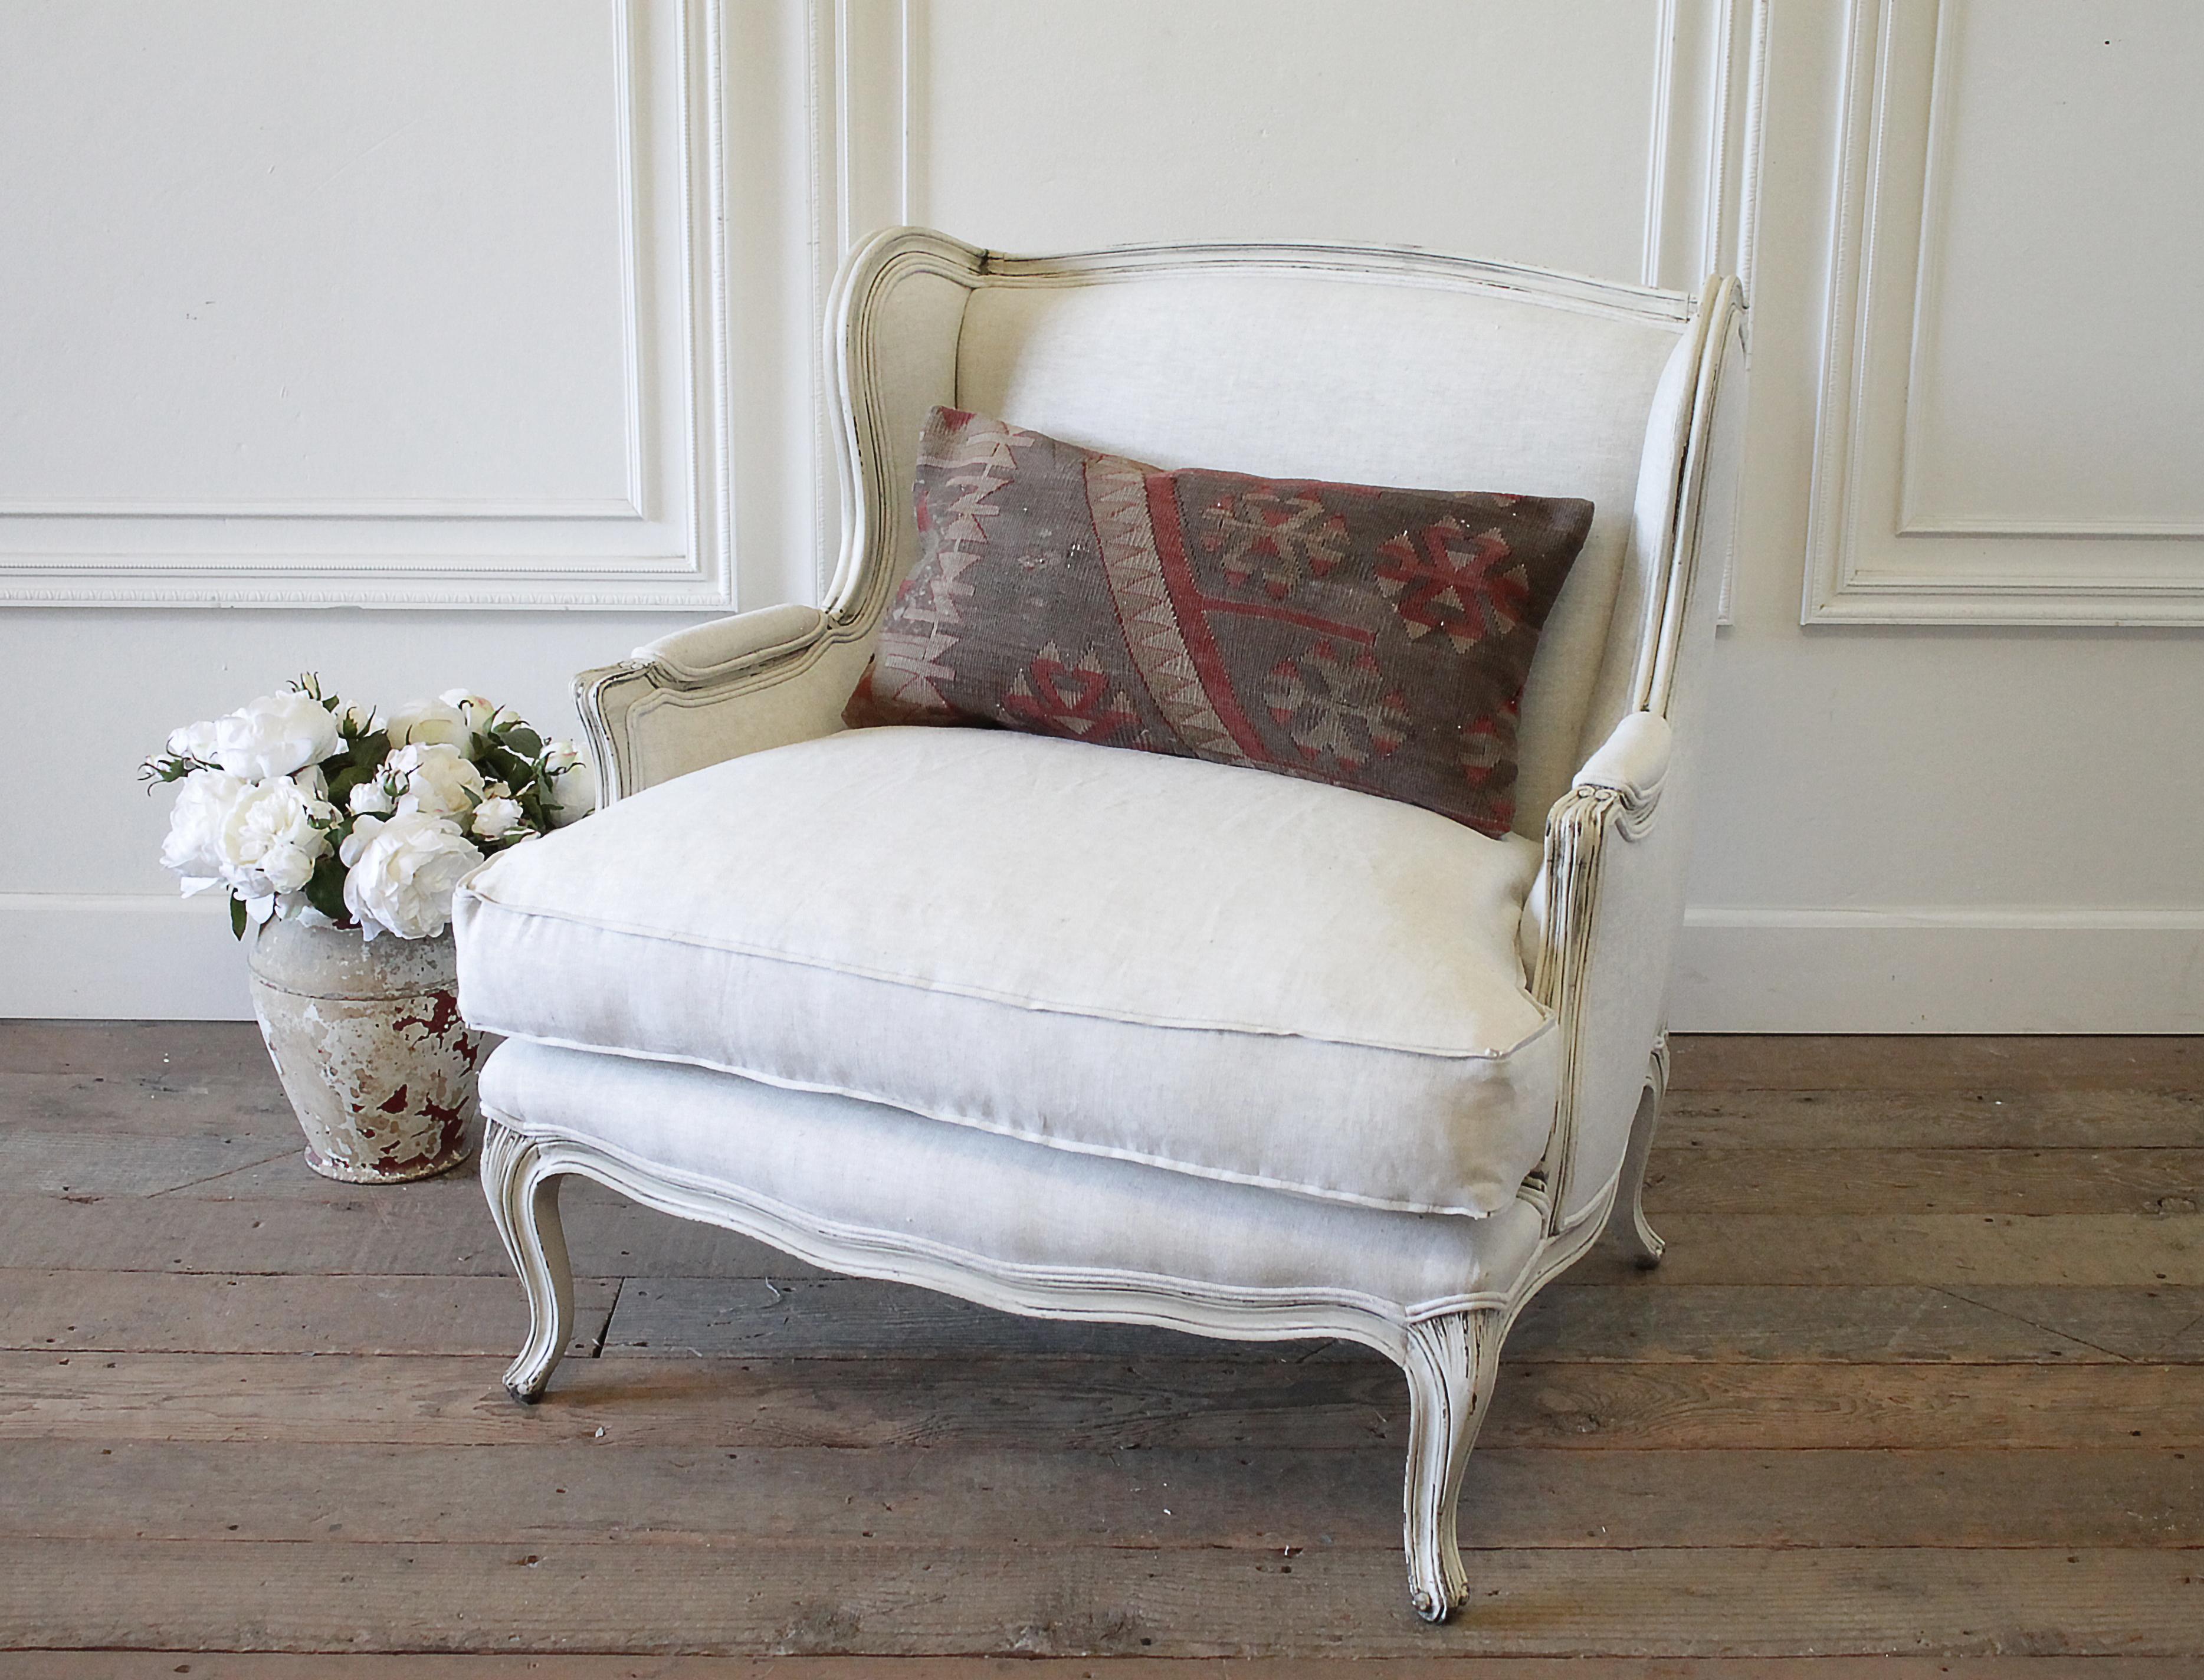 Vintage French Provincial wing back style chair upholstered in natural linen
Painted in our oyster white, which is an off white with subtle distressed edges, and antique glazed patina. Legs are solid and sturdy, cushion is down wrapped, medium-firm